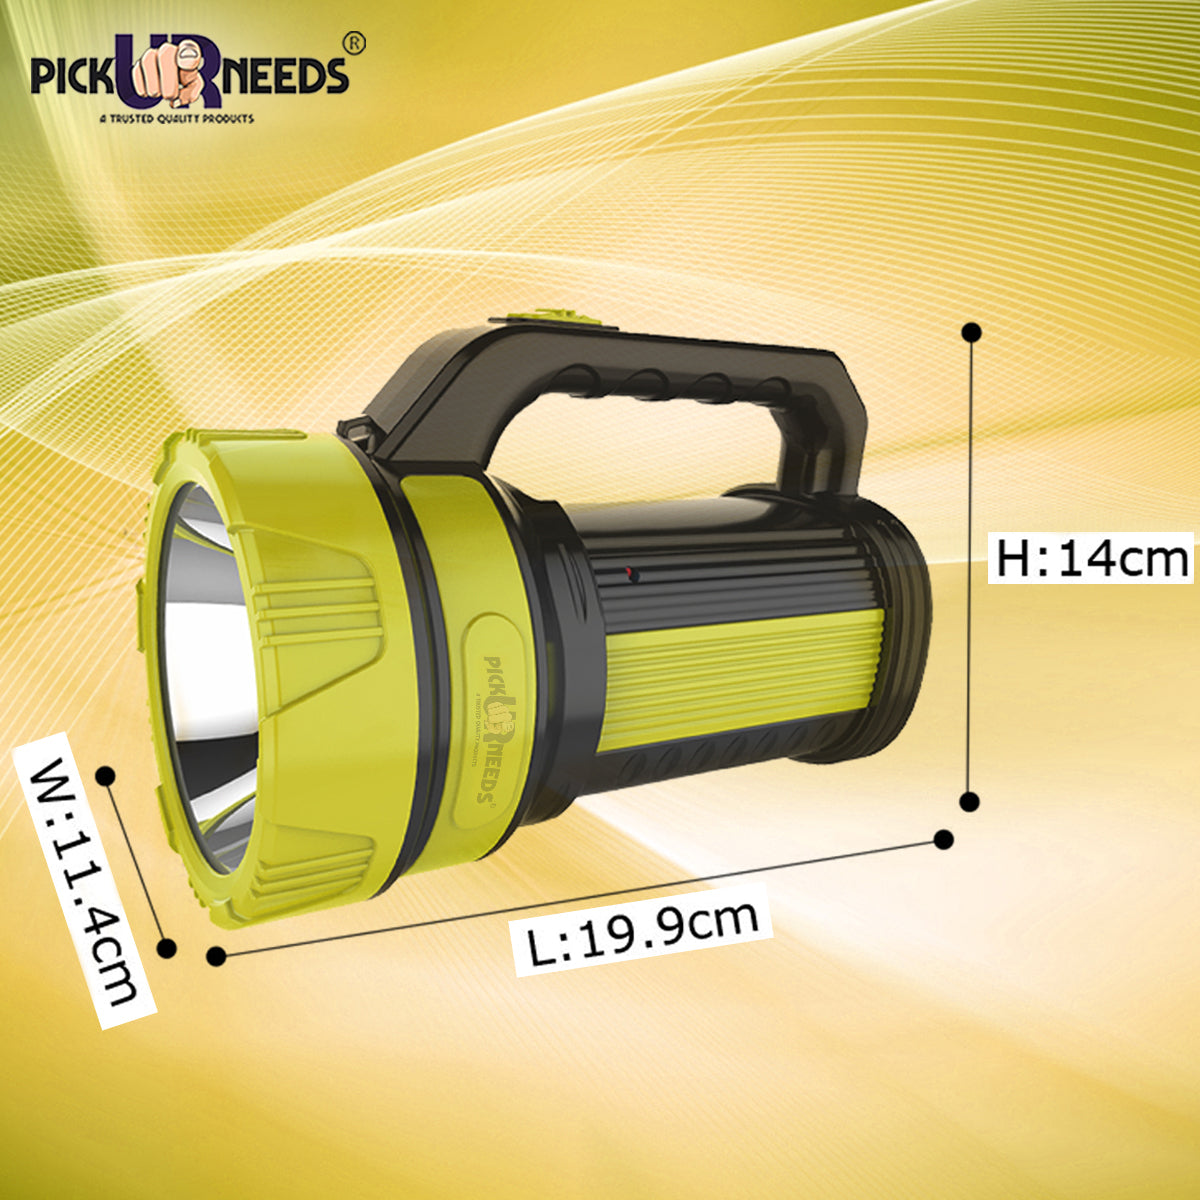 Pick Ur Needs Premium Quality 50 Watt Rechargeable Long Range Search Torch With 2 Side Emergency Tube Light